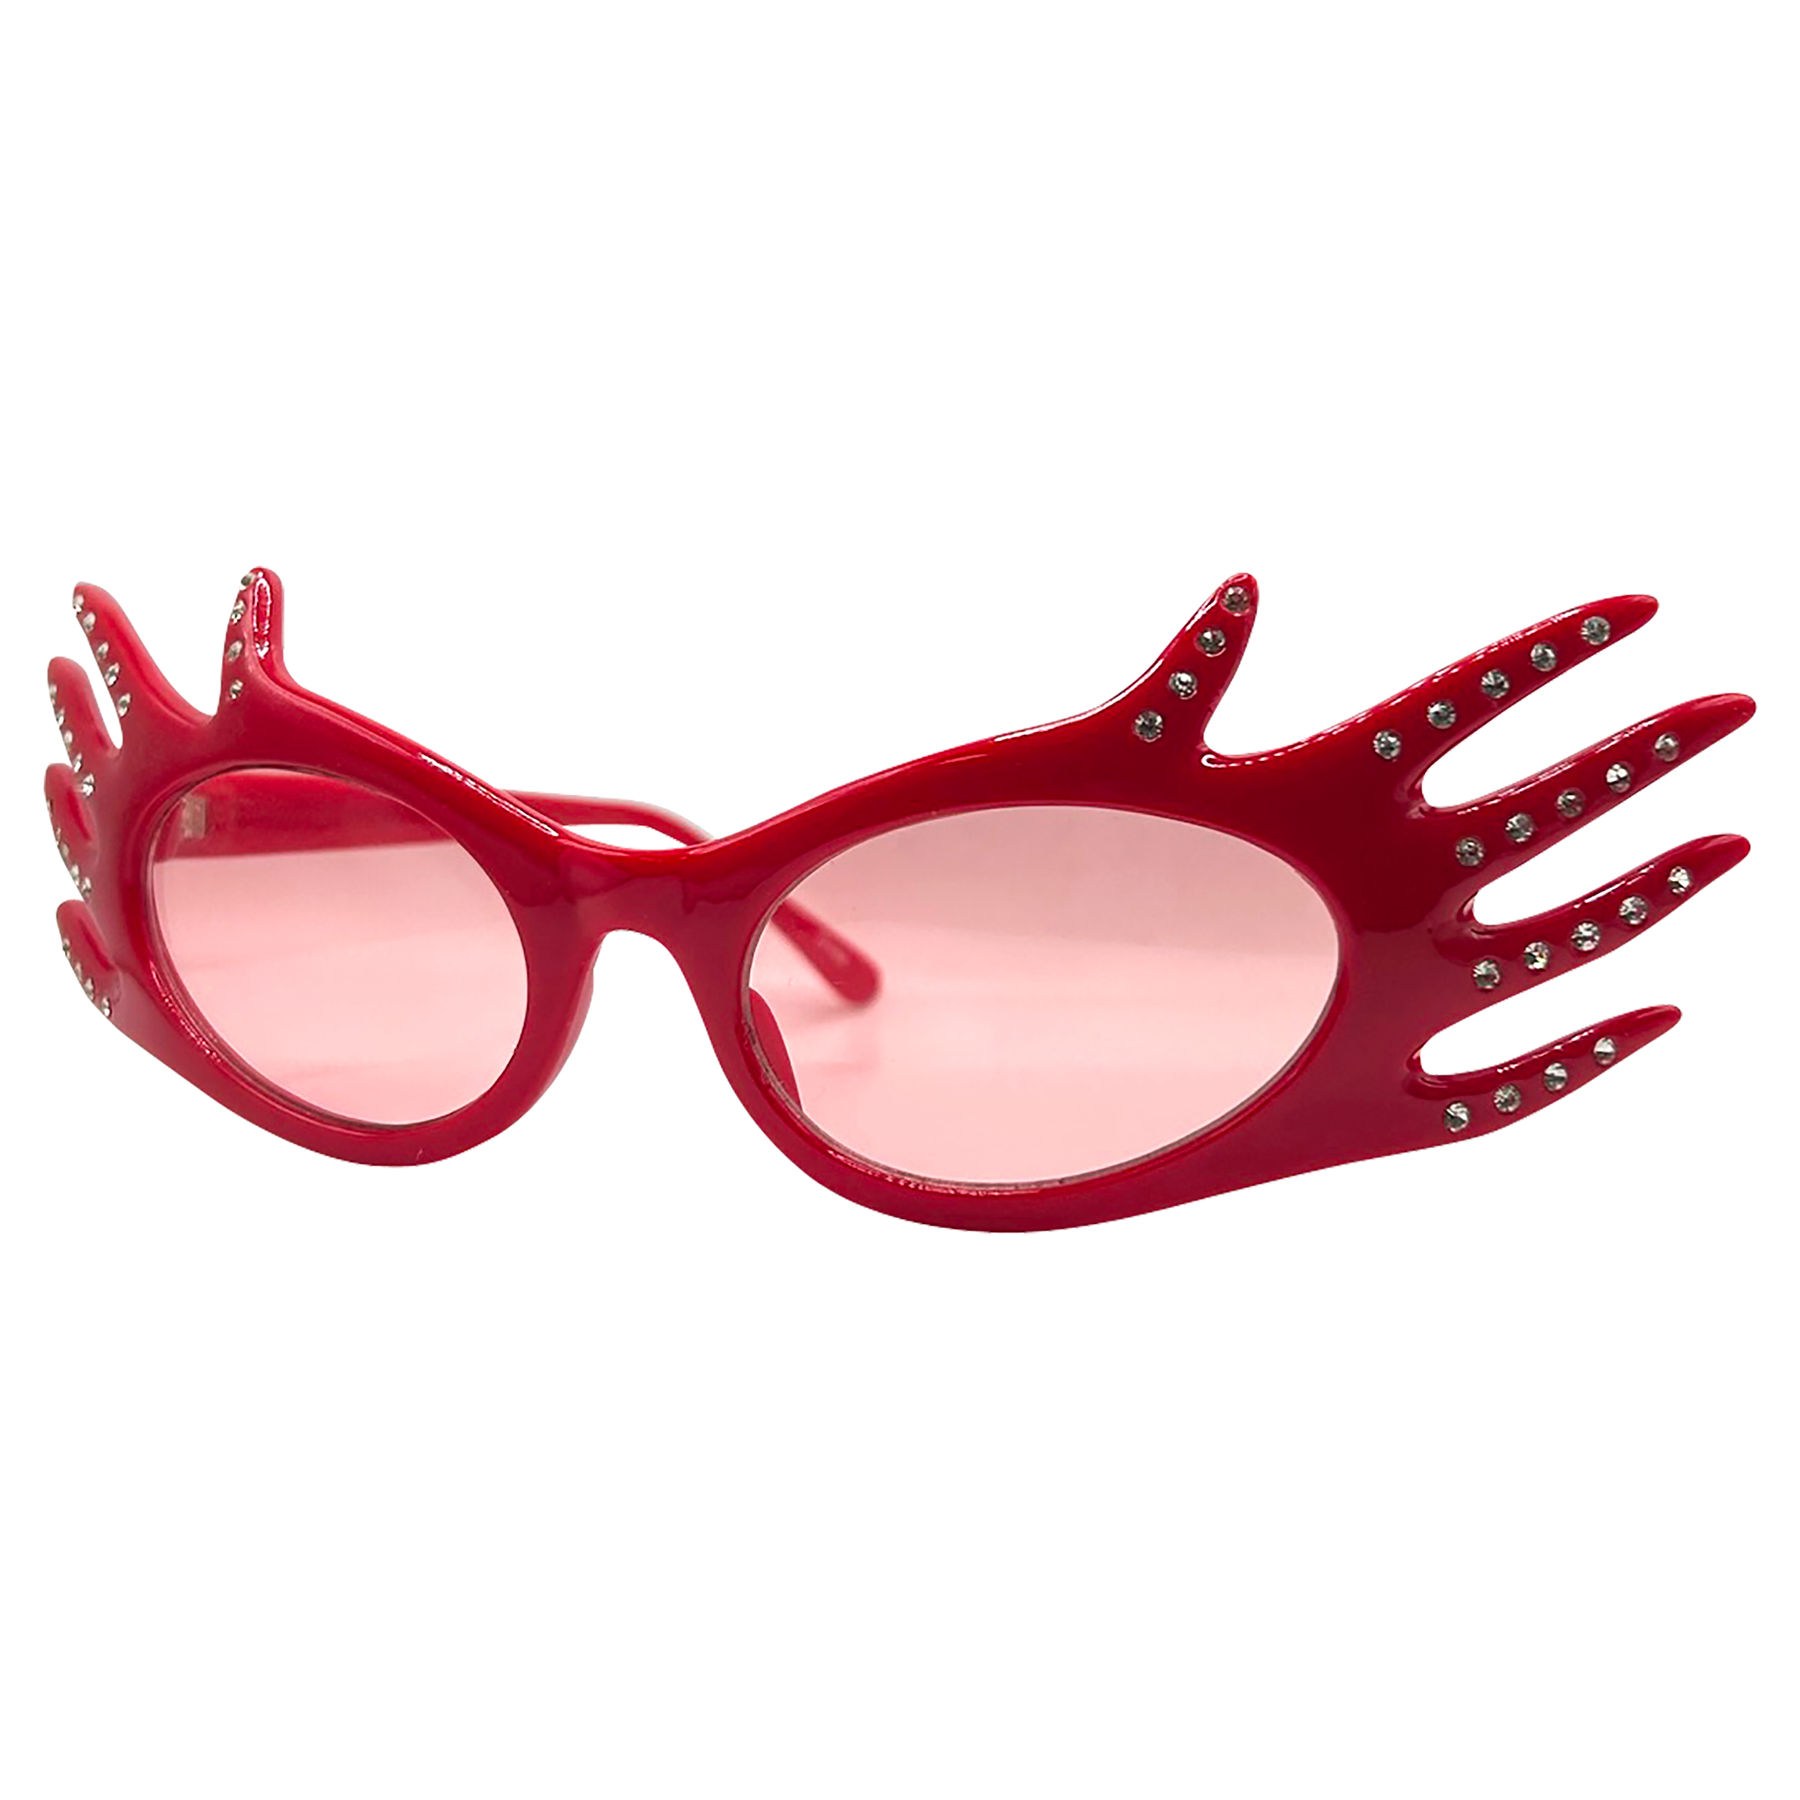 DIVINE Red/Pink 80s Sunglasses